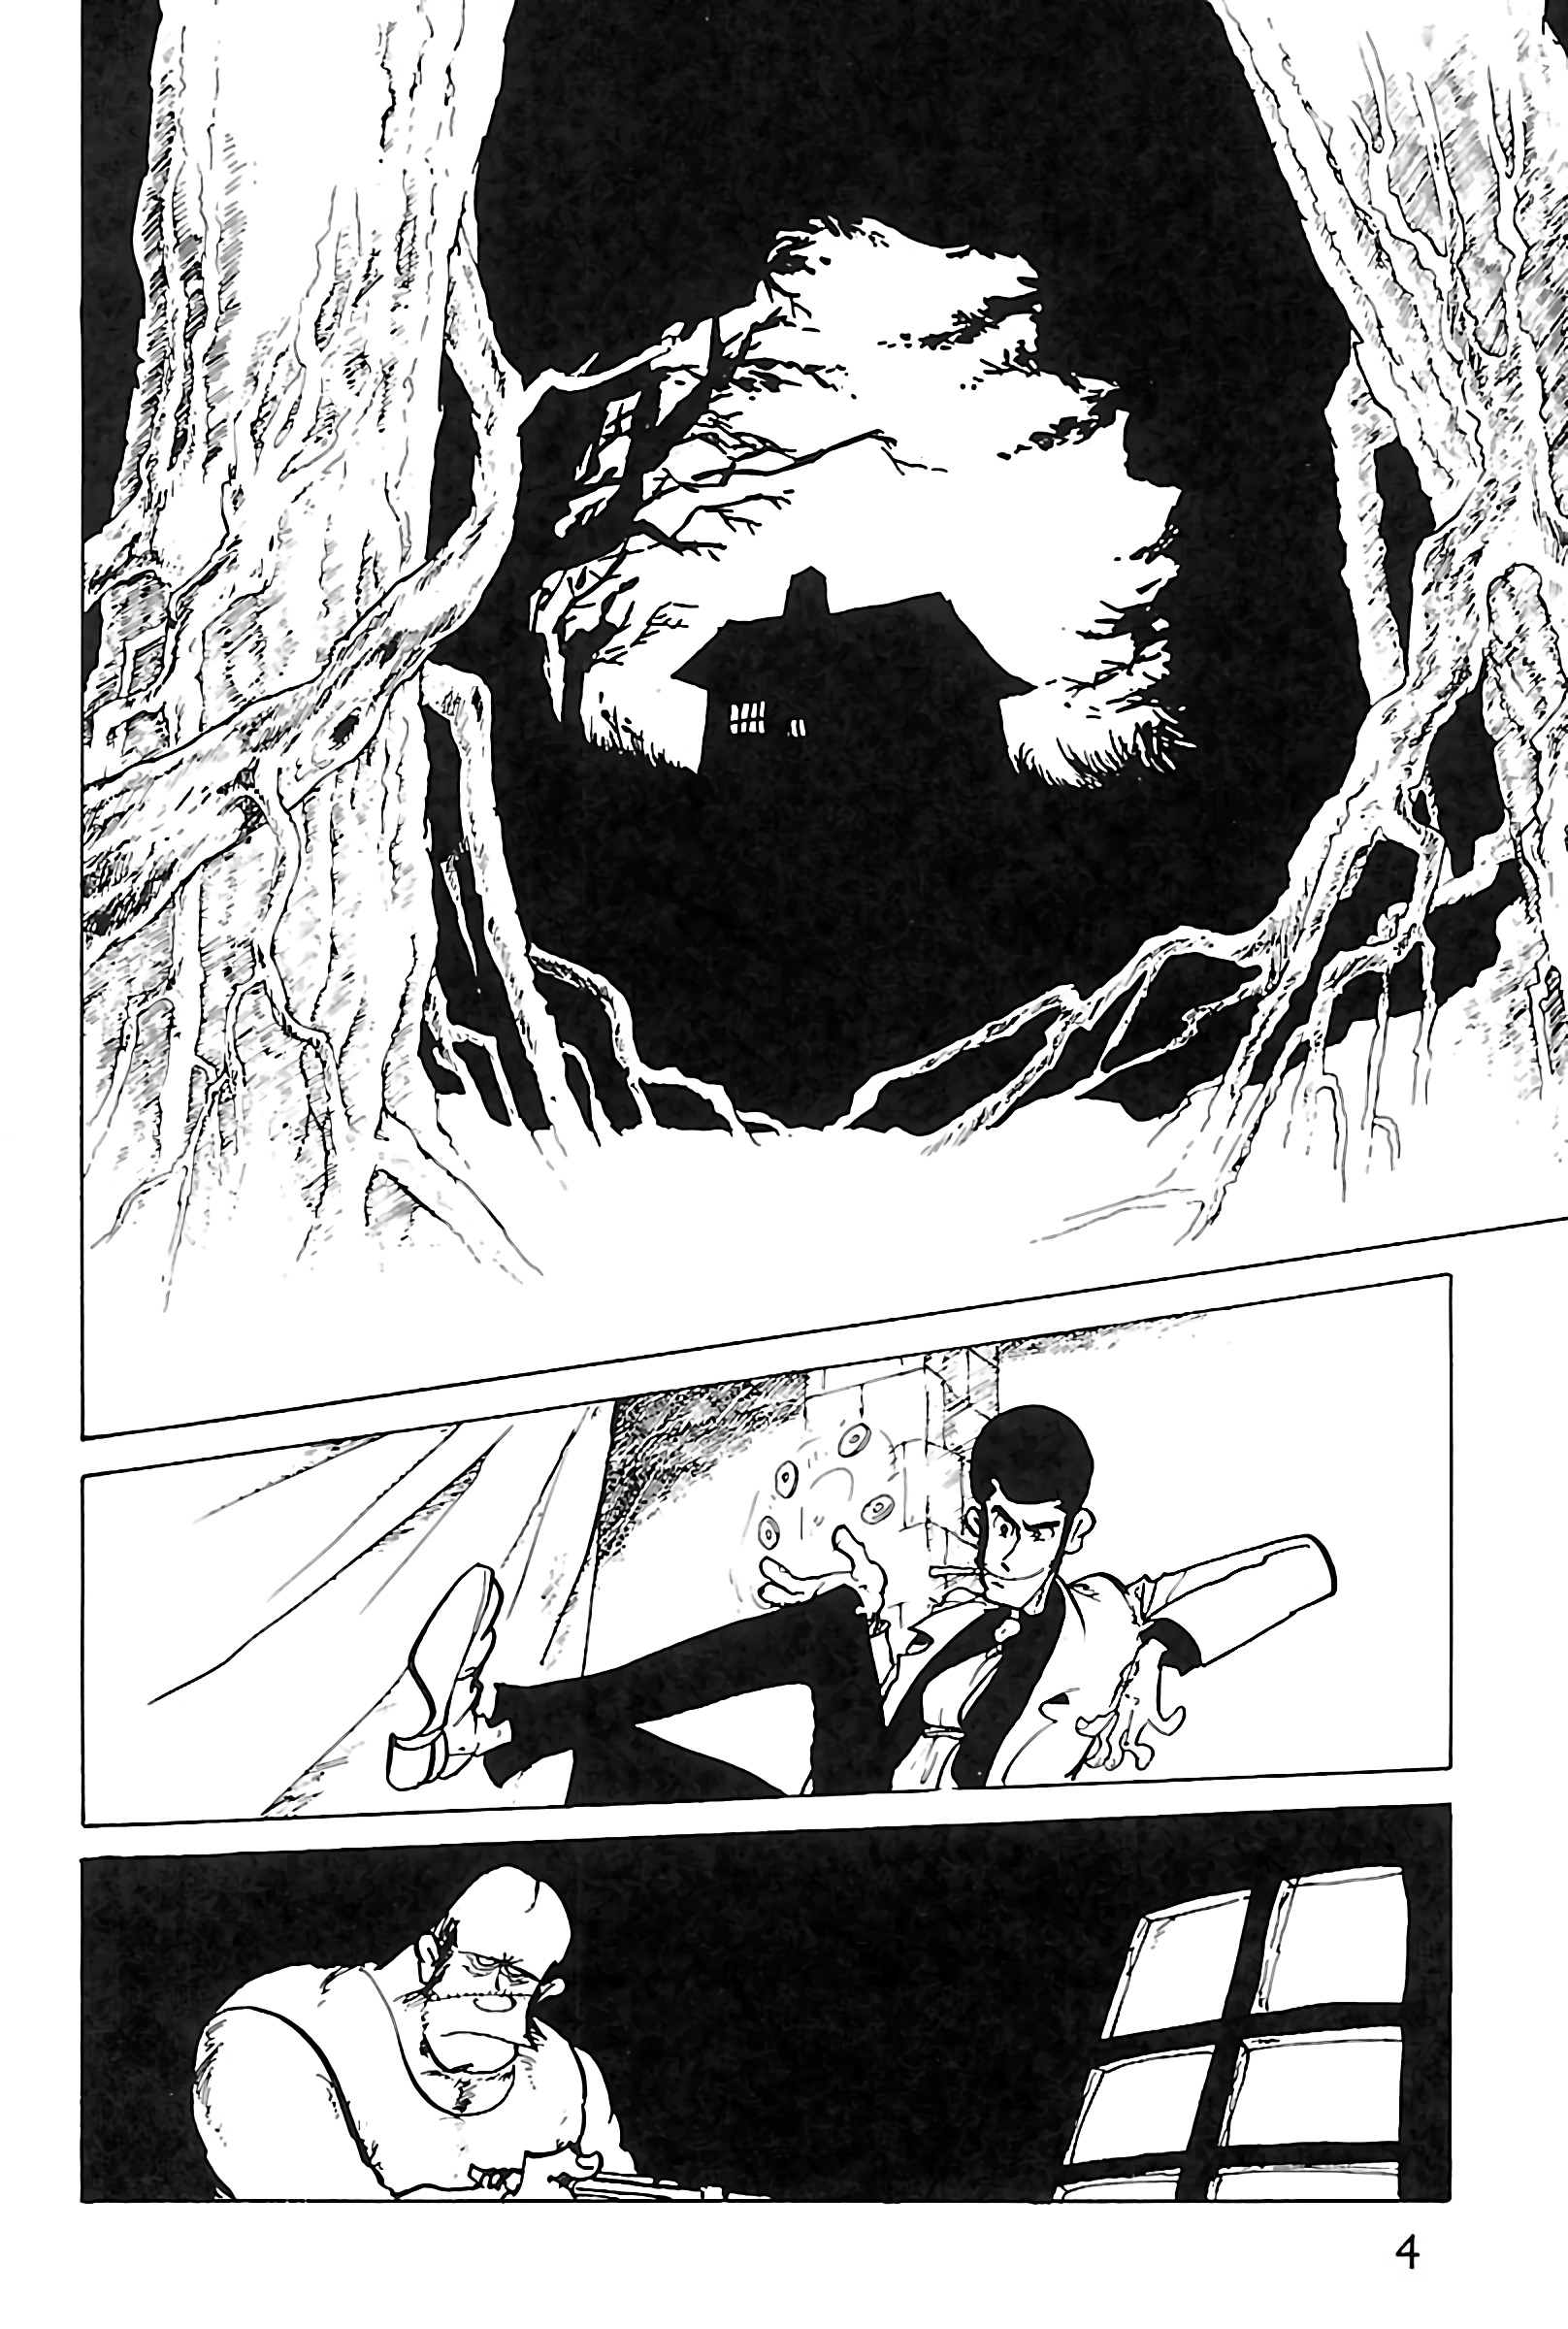 Lupin Iii: World’S Most Wanted - Page 2